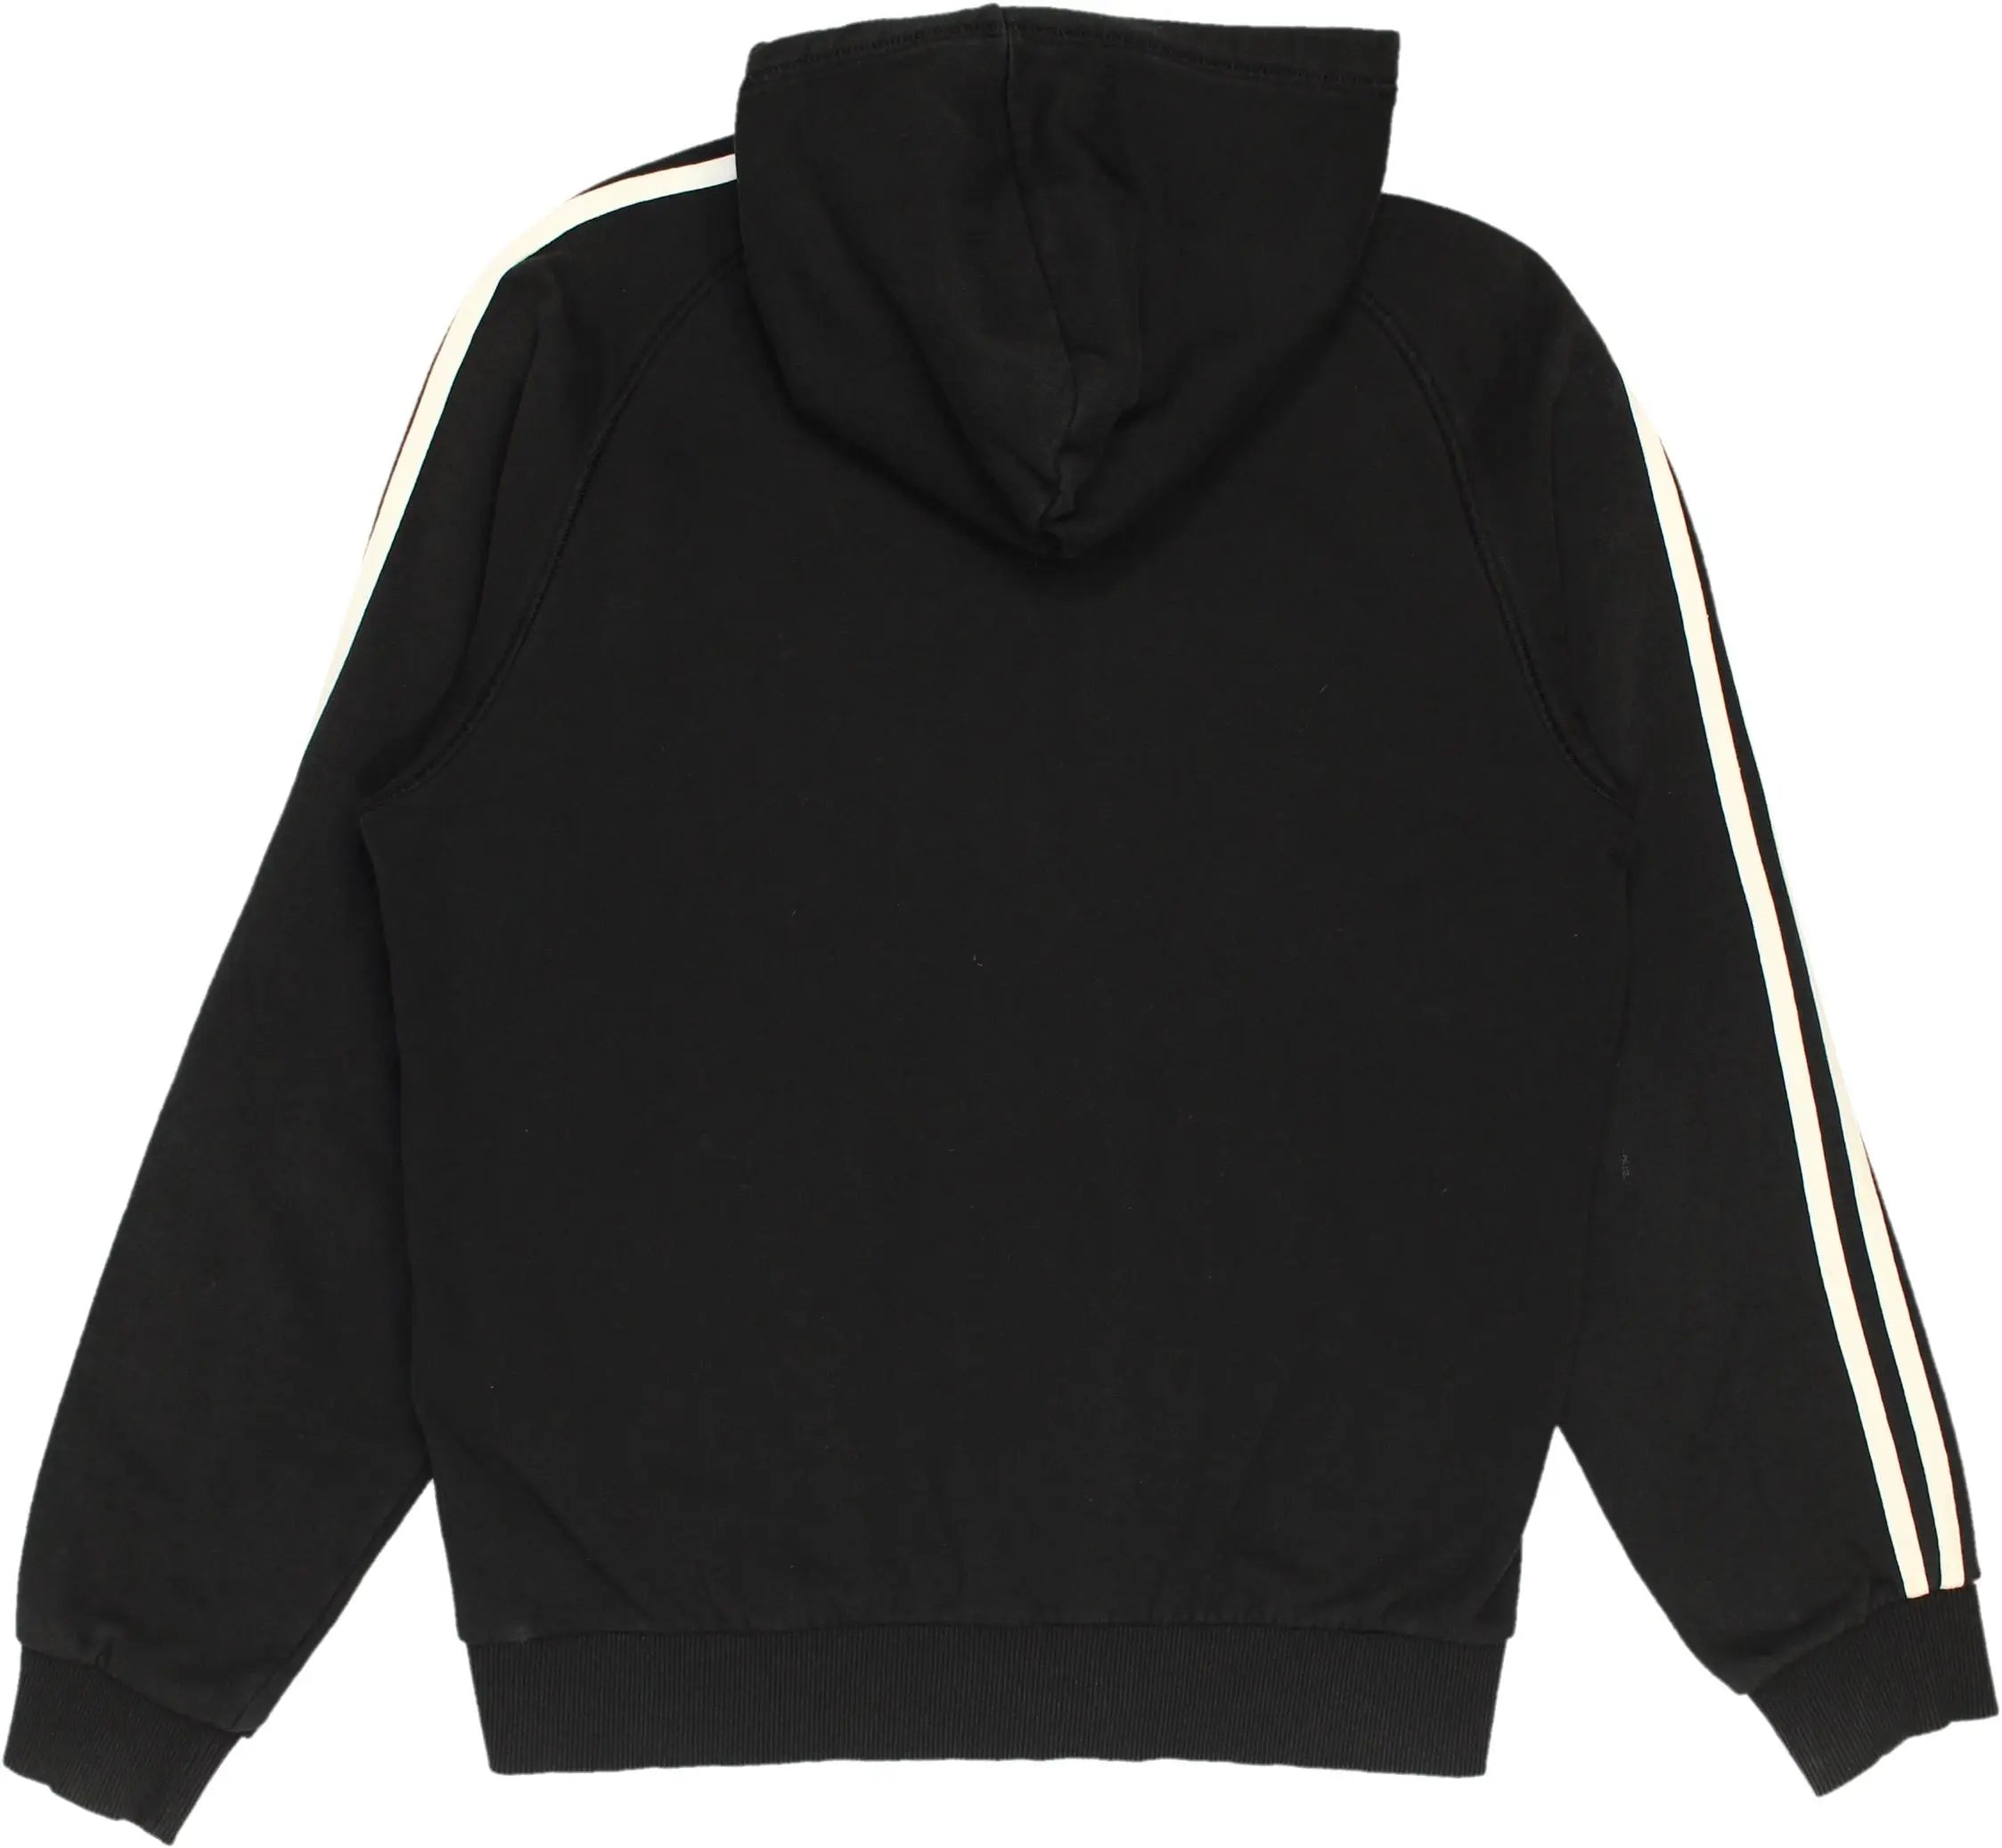 Adidas - Black Zip-up Hoodie by Adidas- ThriftTale.com - Vintage and second handclothing